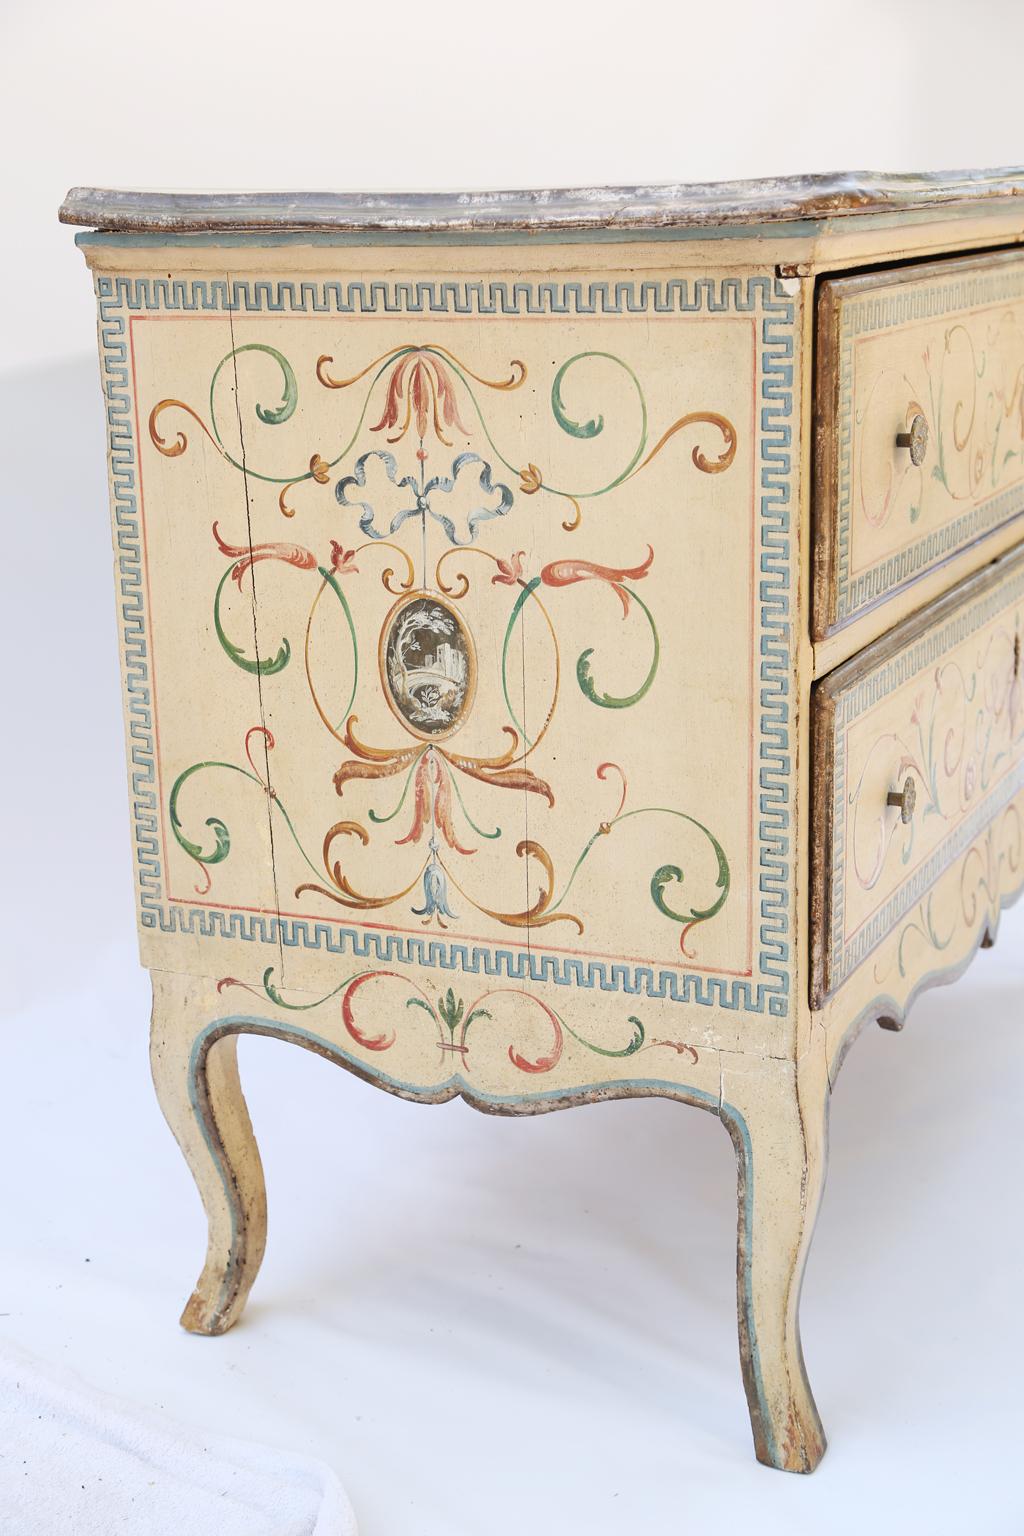 Period commode, having a painted and parcel gilt finish, its rectangular molded top, with shaped front, over double stacked drawers, its serpentine stretcher raised on cabriole legs, the entire piece hand-painted with classical motifs of scrollwork